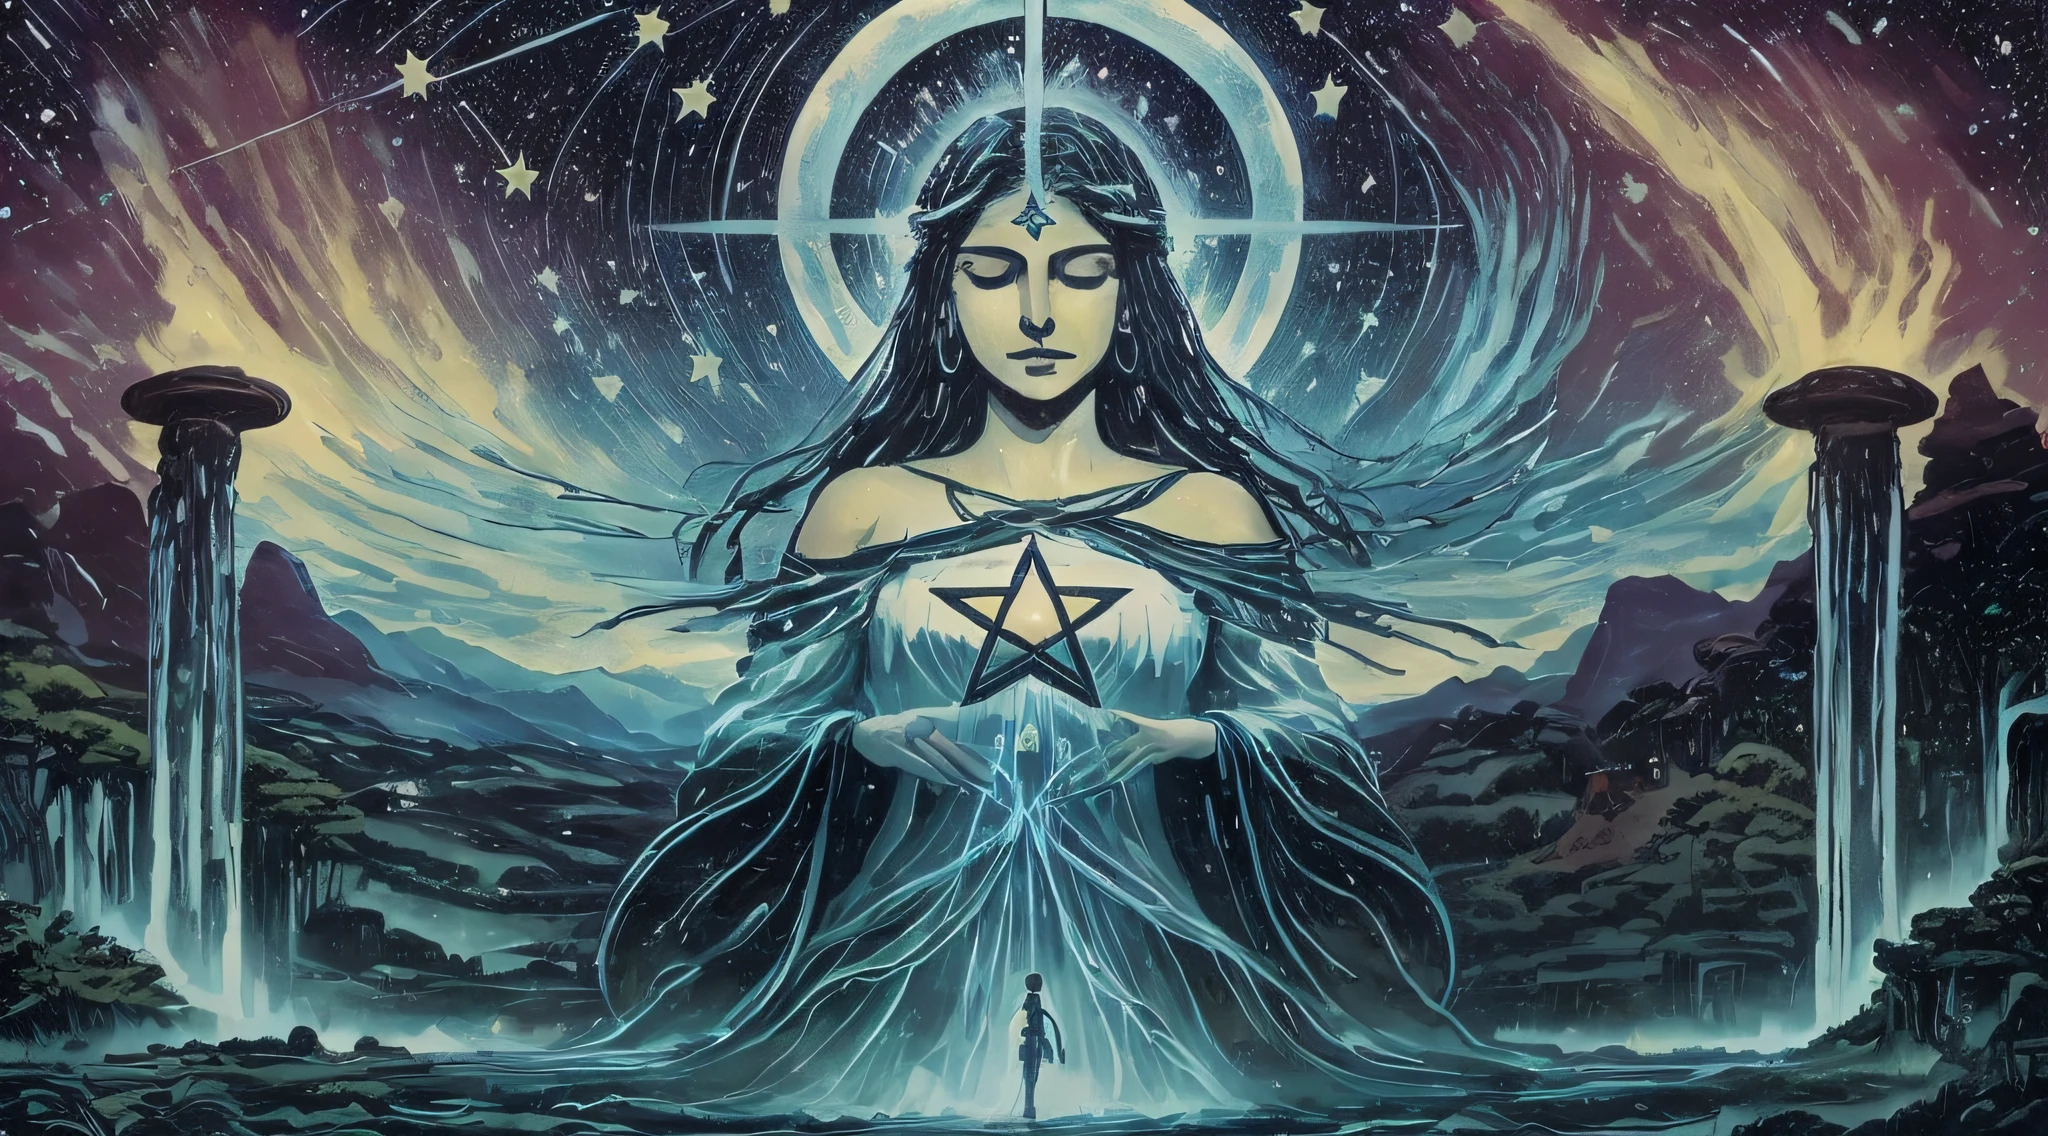 The card "The Star" in the Tarot is an image of hope and renewal. It depicts a, kneeling on the edge of a river, pouring water from two jugs. Above it, a bright star illuminates the night sky. The woman represents the connection between heaven and earth, and the water symbolizes the spiritual energy flowing into the physical world. The Star card evokes feelings of optimism, confidence and healing. It reminds us that even in the darkest moments, there is a bright light that guides us. The star in the sky represents divine guidance, showing us the way forward. It brings with it a sense of peace and tranquility, inviting us to connect with our intuition and follow our deepest dreams. The Star card encourages us to have hope, believe in ourselves, and seek inner harmony. It reminds us that we are able to heal, transform, and manifest our highest aspirations. The presence of the Star card in a reading often indicates a period of renewal, inspiration, and spiritual protection. It invites us to trust in our journey and to have faith in a better future.